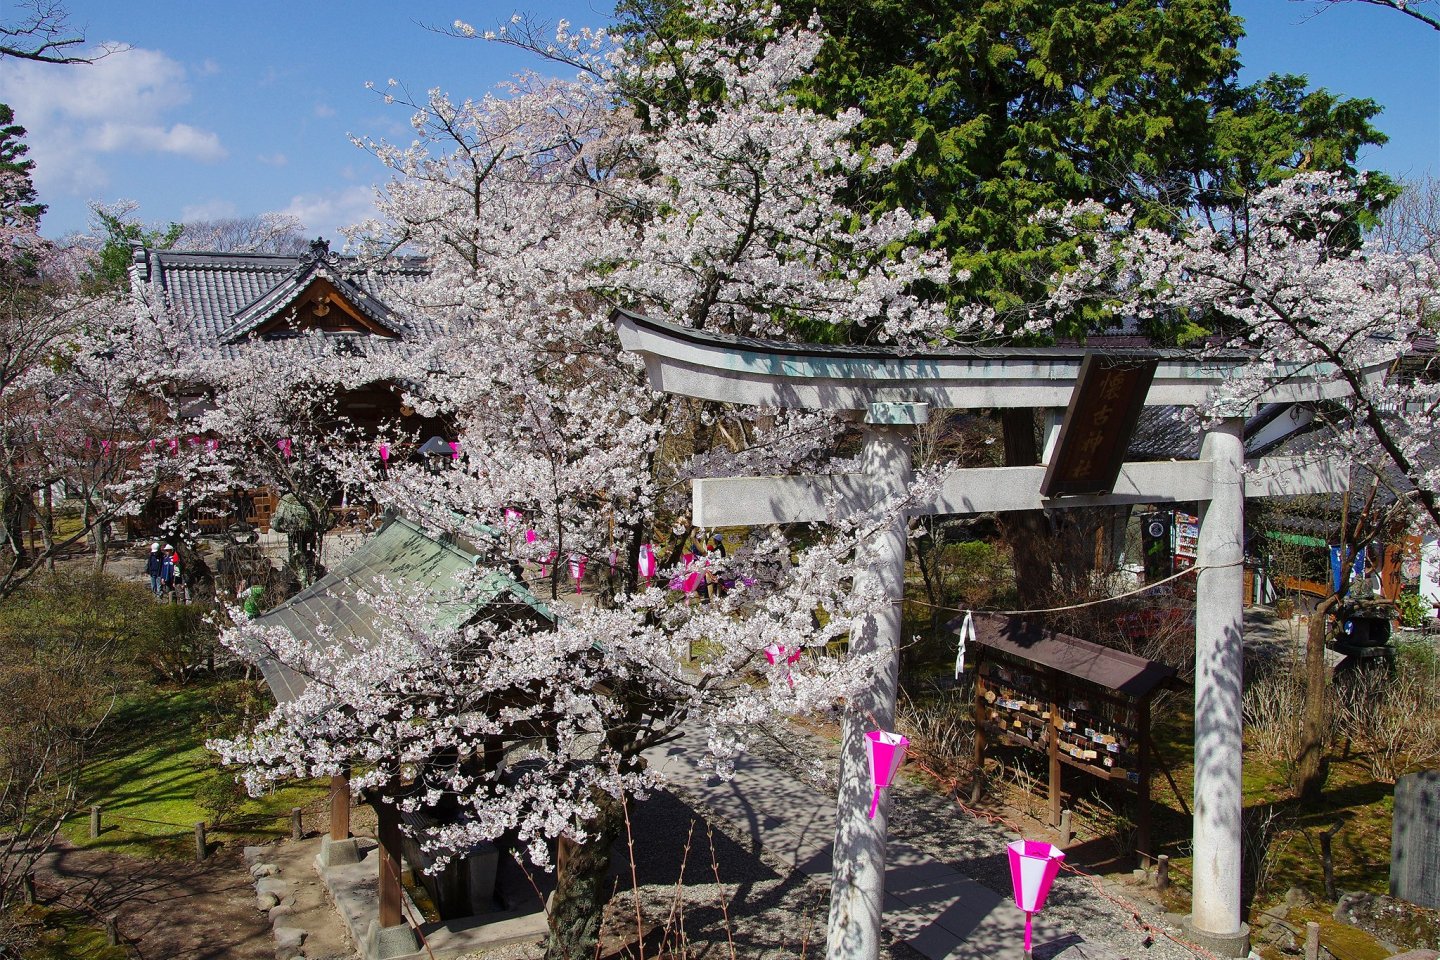 Some of the beautiful blossoms at Nagano\'s Komoro Castle Park